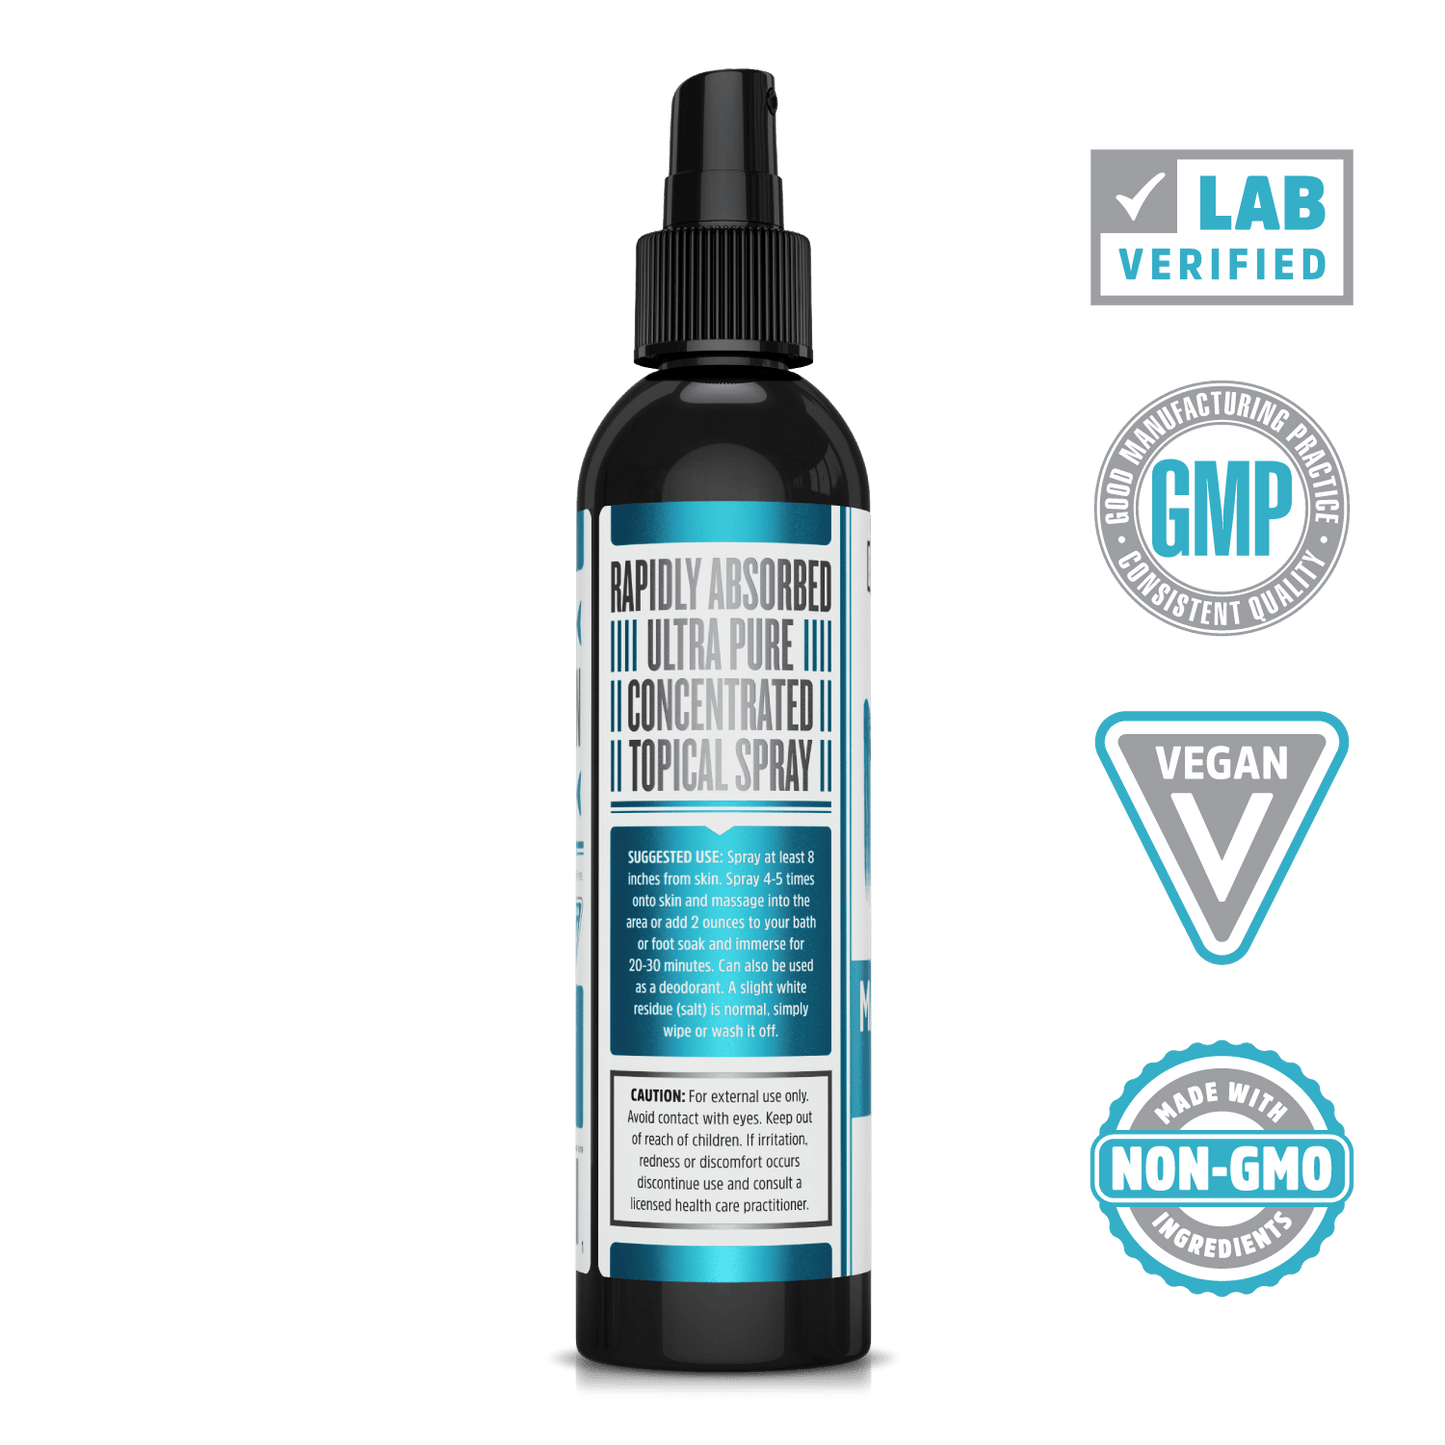 Zhou Nutrition Magnesium Oil Spray for Muscle Relaxation. Lab verified, good manufacturing practices, vegan, made with non-GMO ingredients